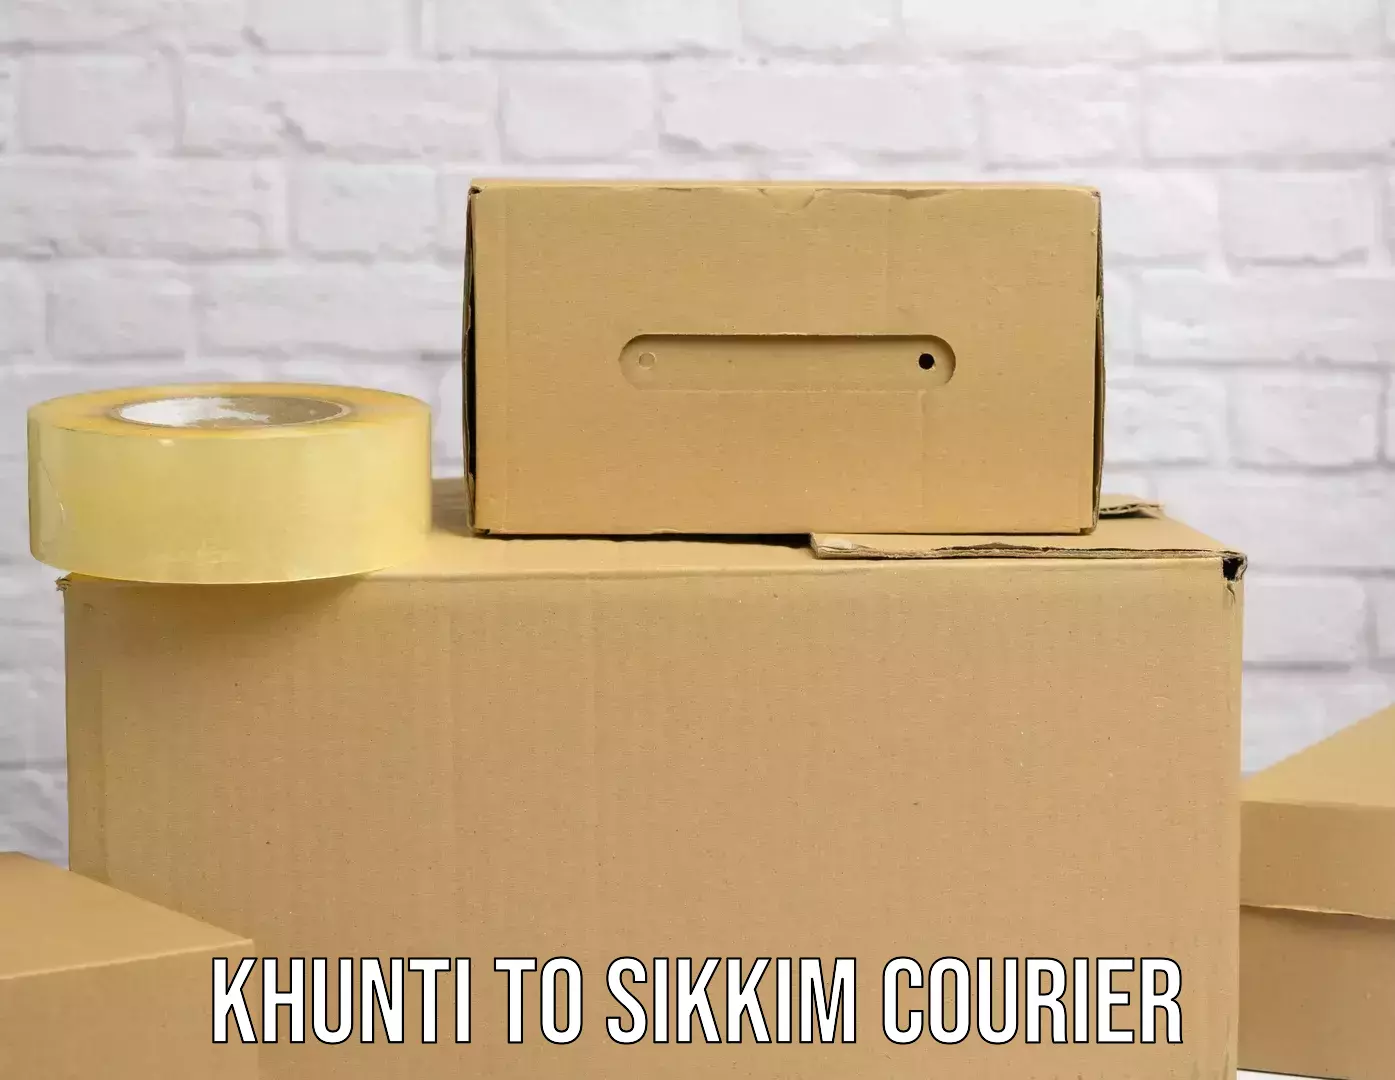 Full-service courier options Khunti to Mangan